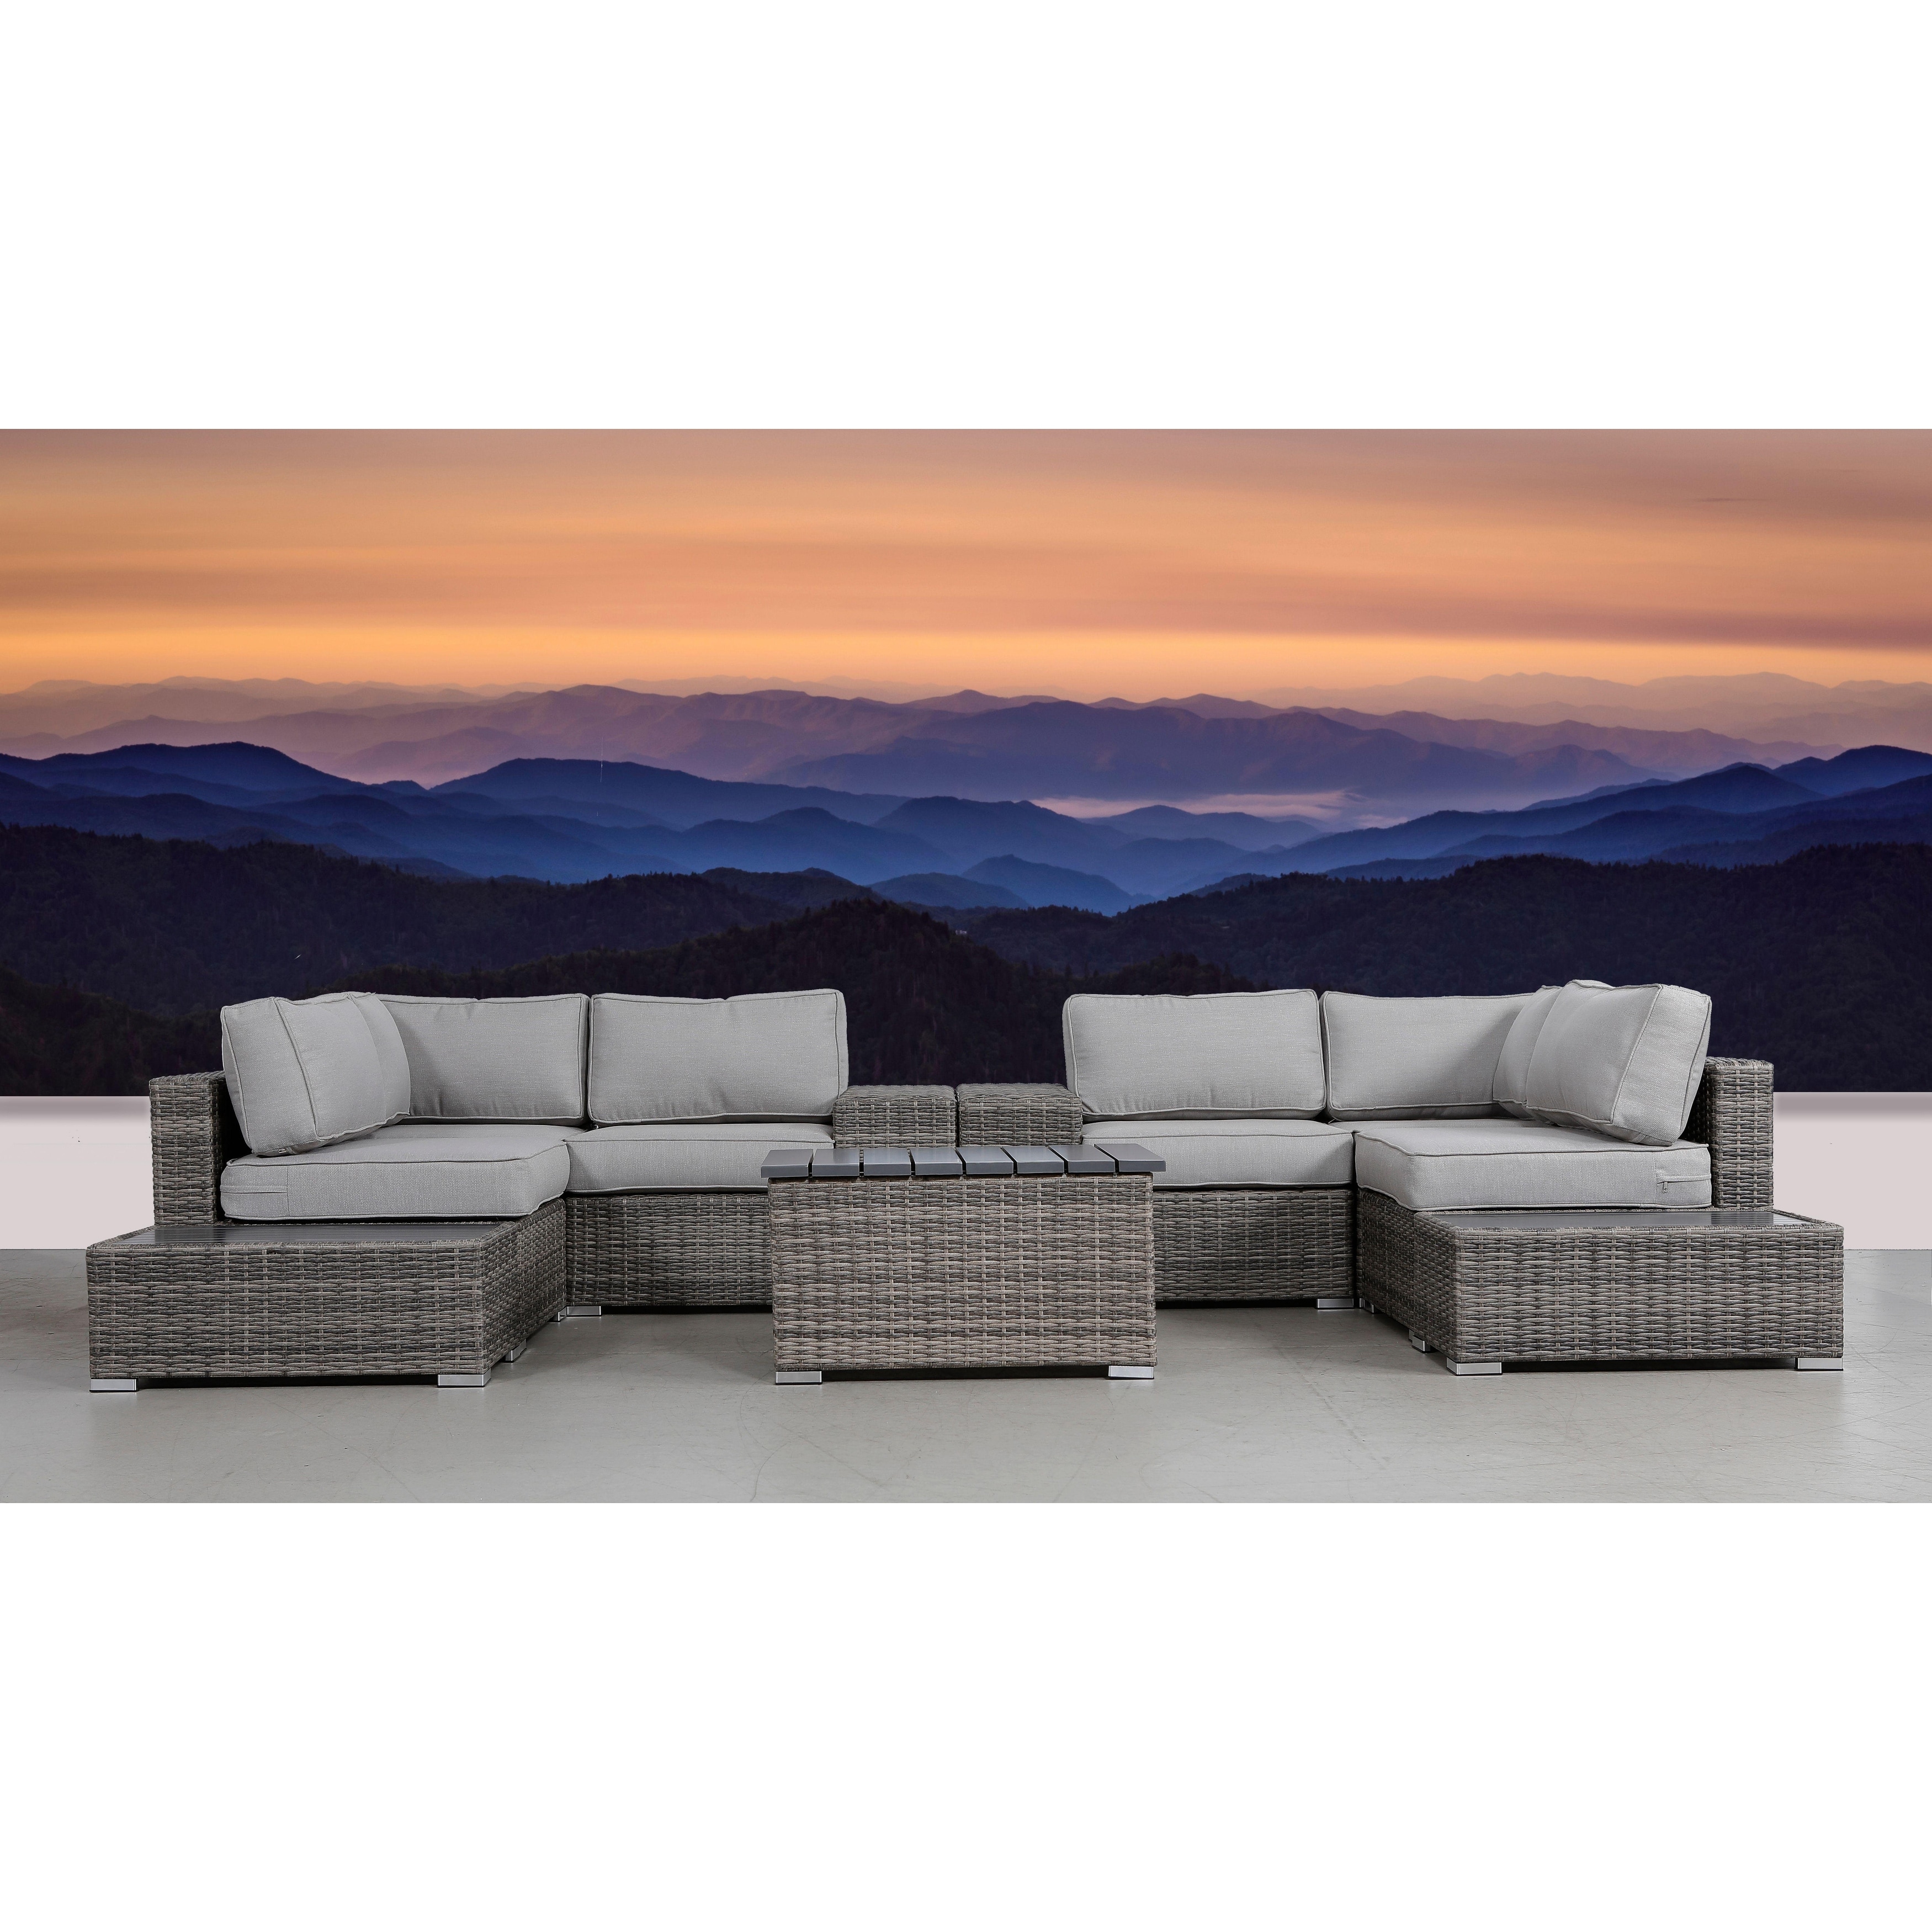 Lsi 11 Piece Rattan Sectional Seating Group With Cushions